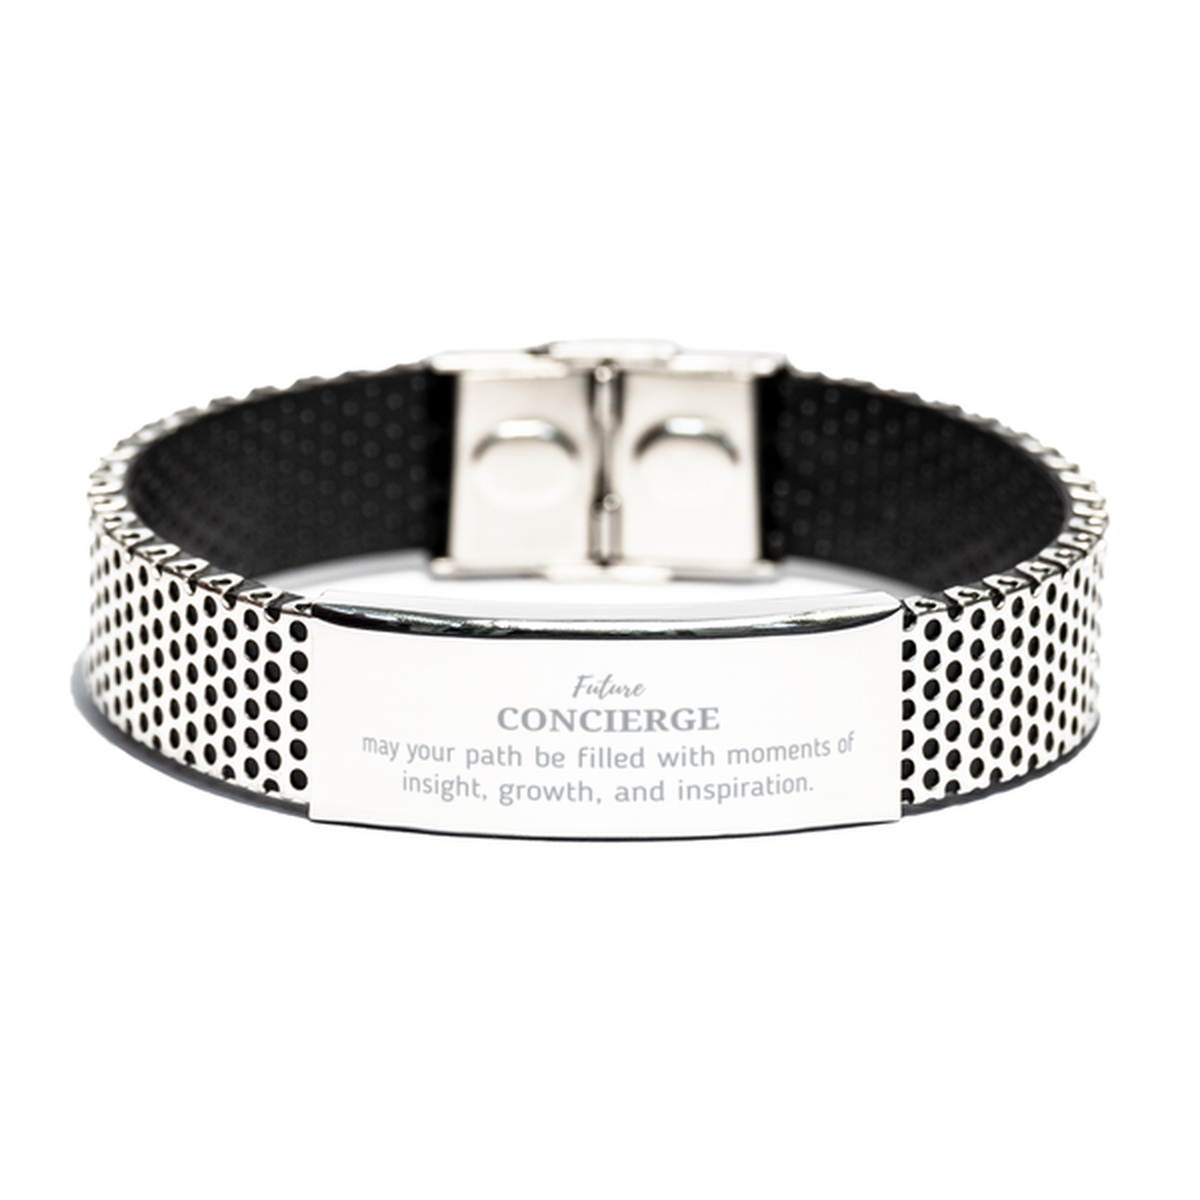 Future Concierge Gifts, May your path be filled with moments of insight, Graduation Gifts for New Concierge, Christmas Unique Stainless Steel Bracelet For Men, Women, Friends